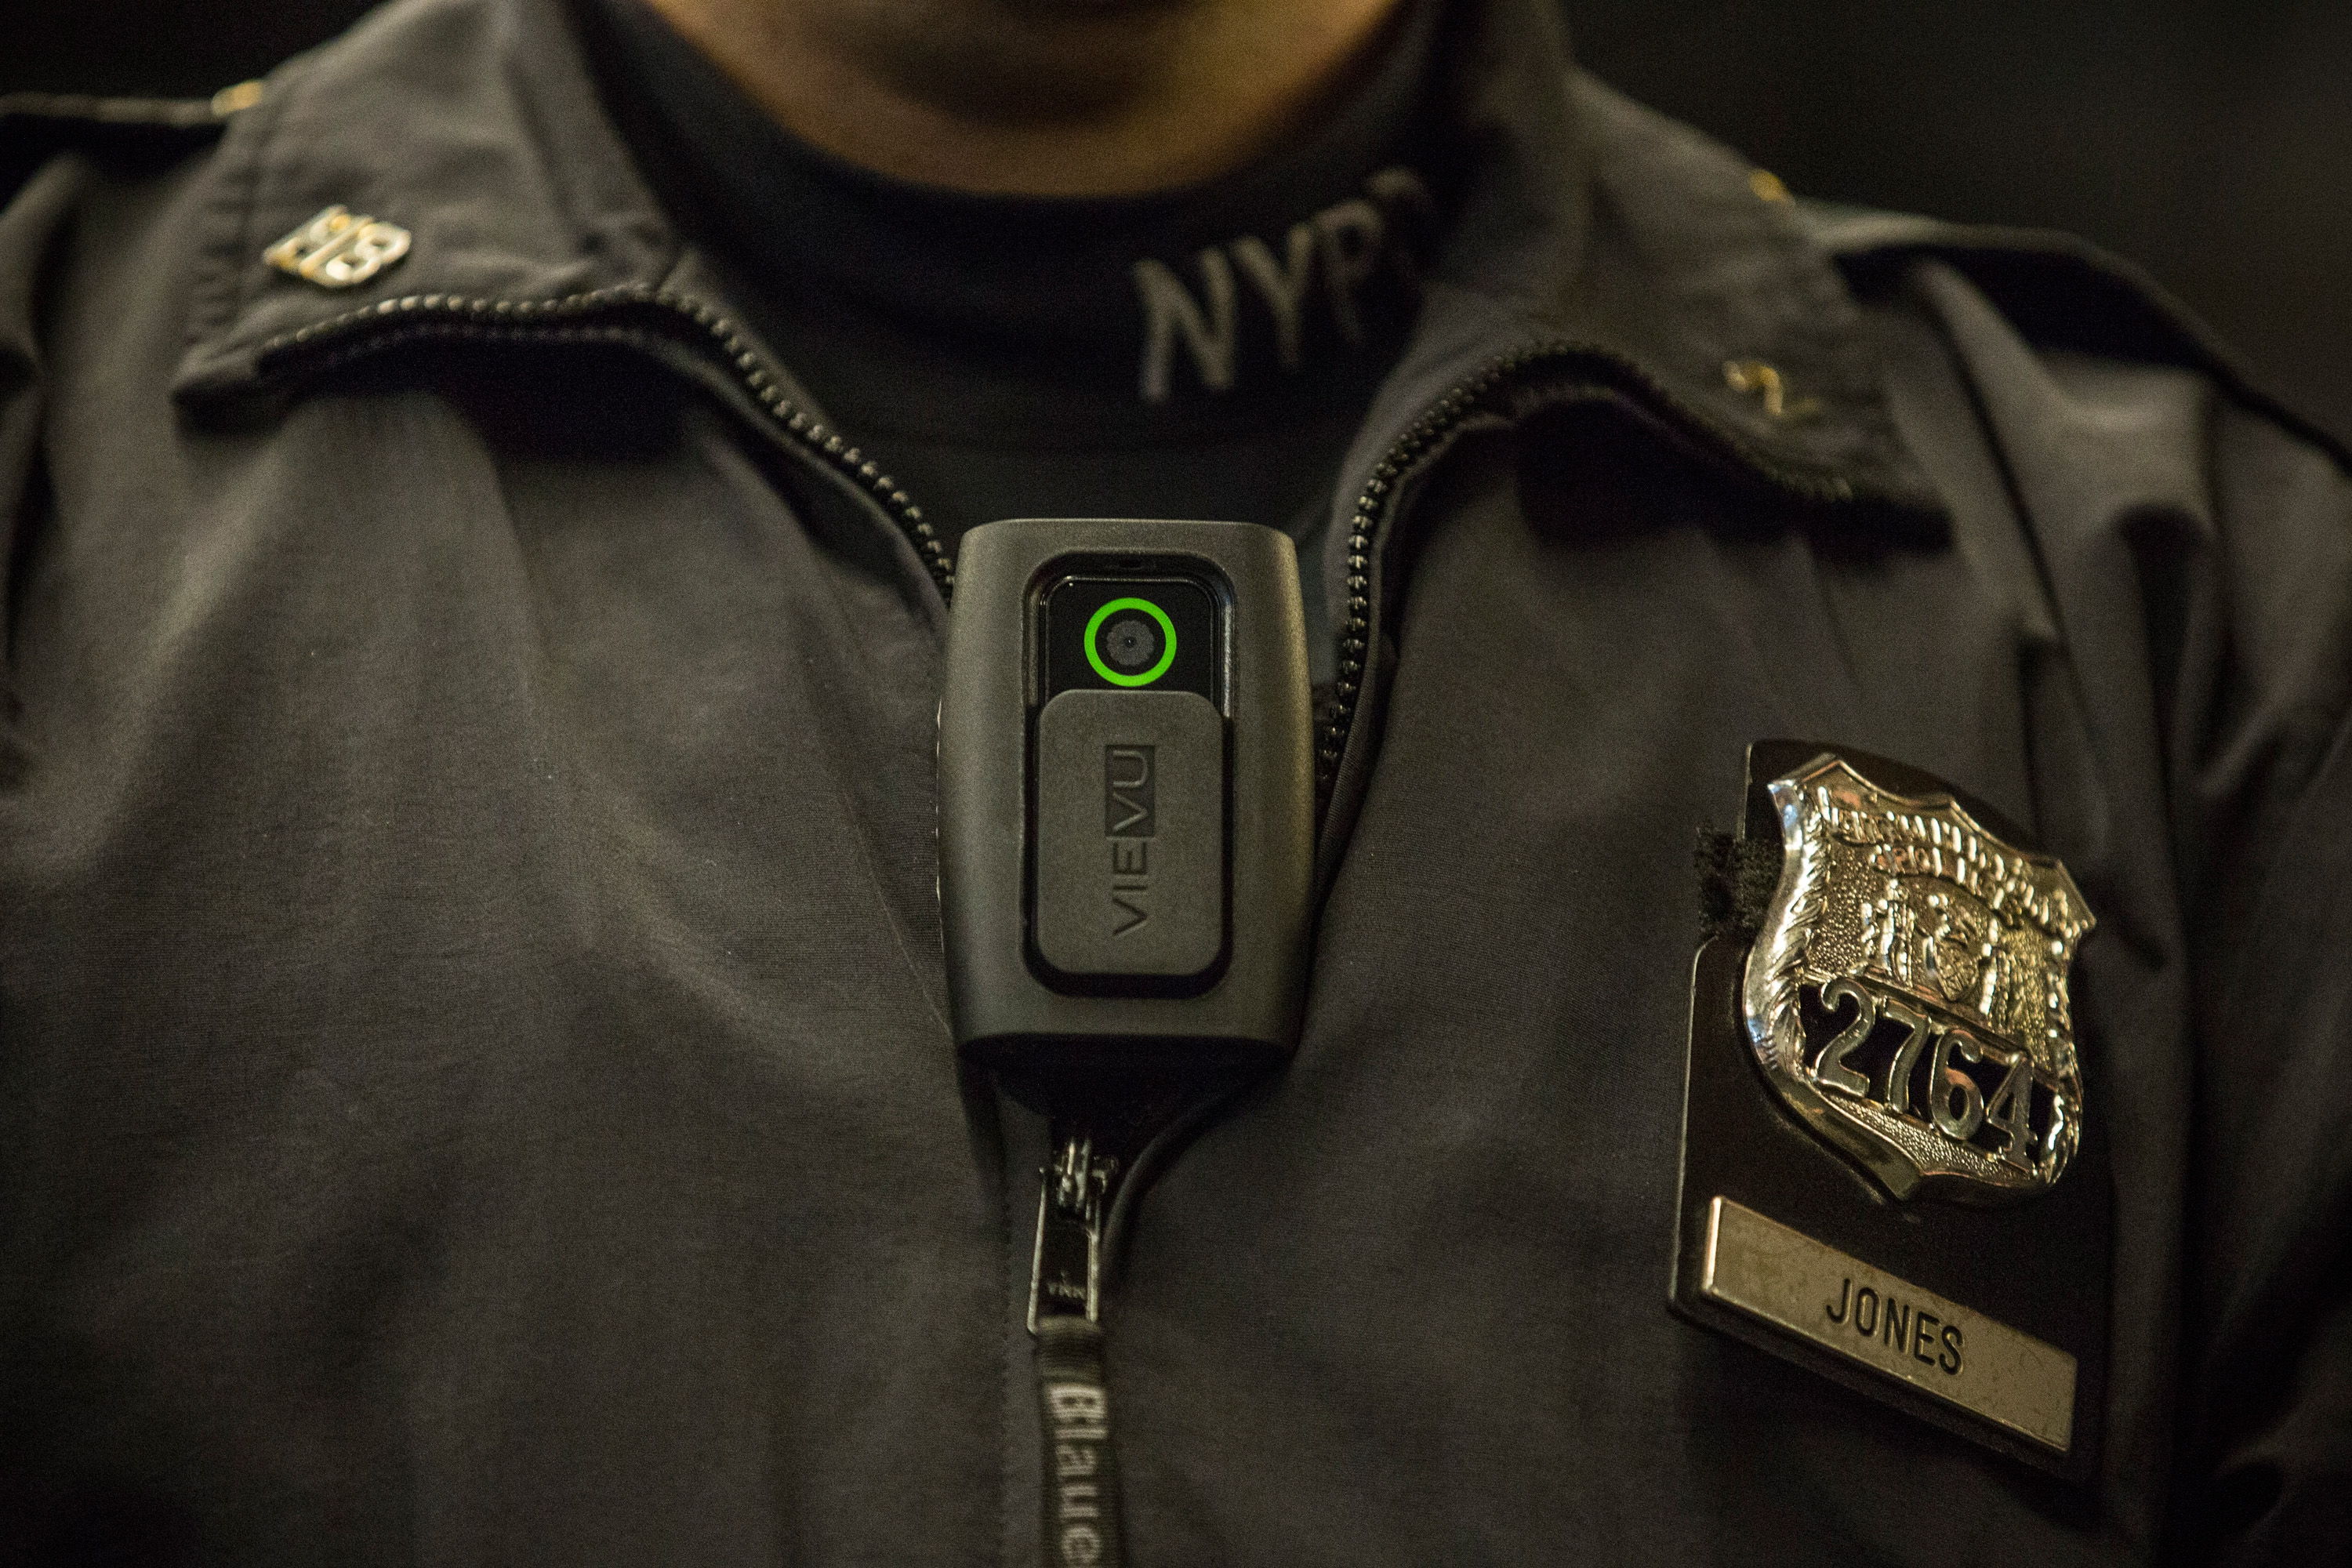 STUDY: Body Cameras Make No Detectable Difference in Police Use of Force